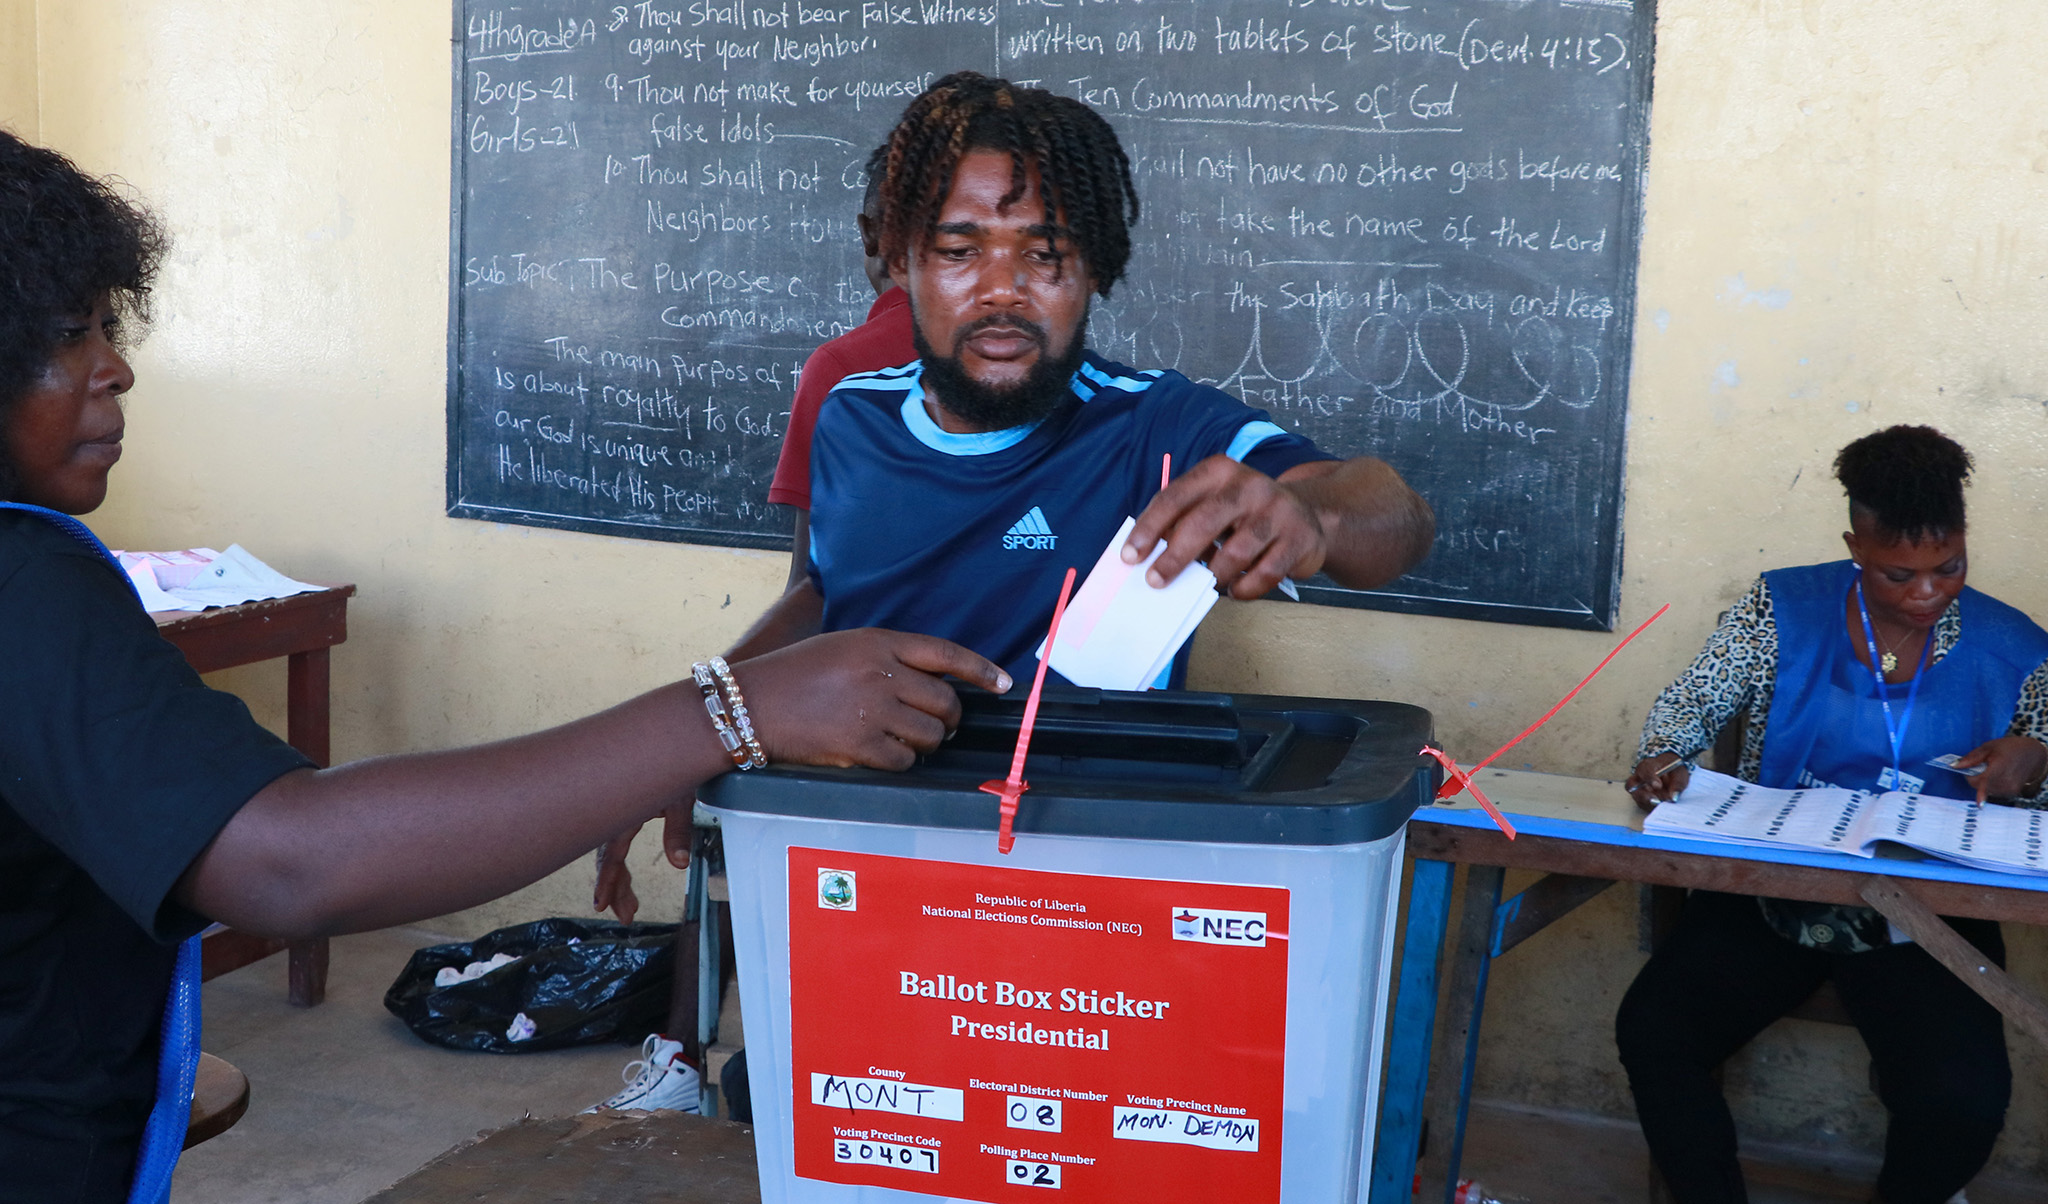 Liberian election workers help a man cast his presidential ballot at a Monrovia school in November. Liberia’s peaceful election and transfer of power could make the country a prodemocracy ‘peer influencer’ in turbulent West Africa. (Flickr/PhotoLiberia)